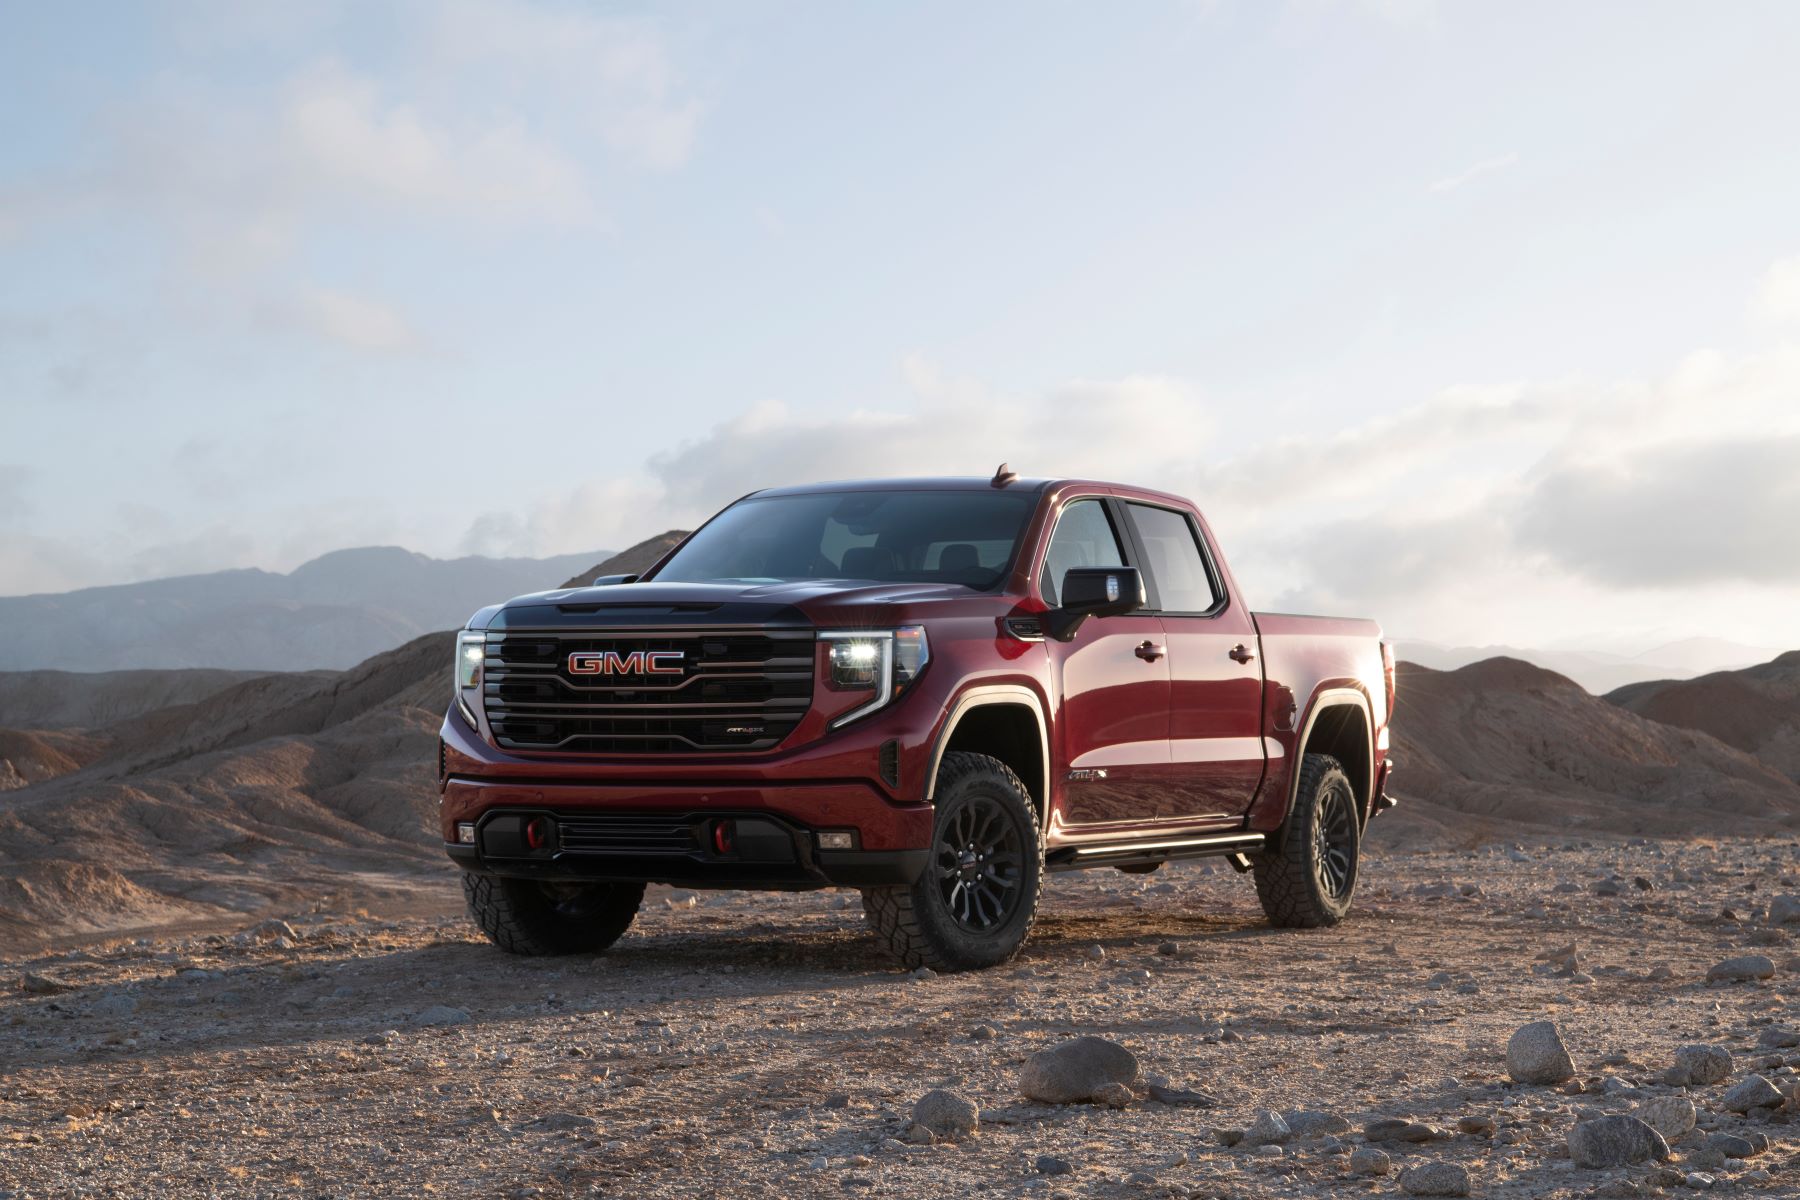 A red 2022 GMC Sierra 1500 AT4X full-size pickup truck model parked on a dirt plain amidst hills and mountains